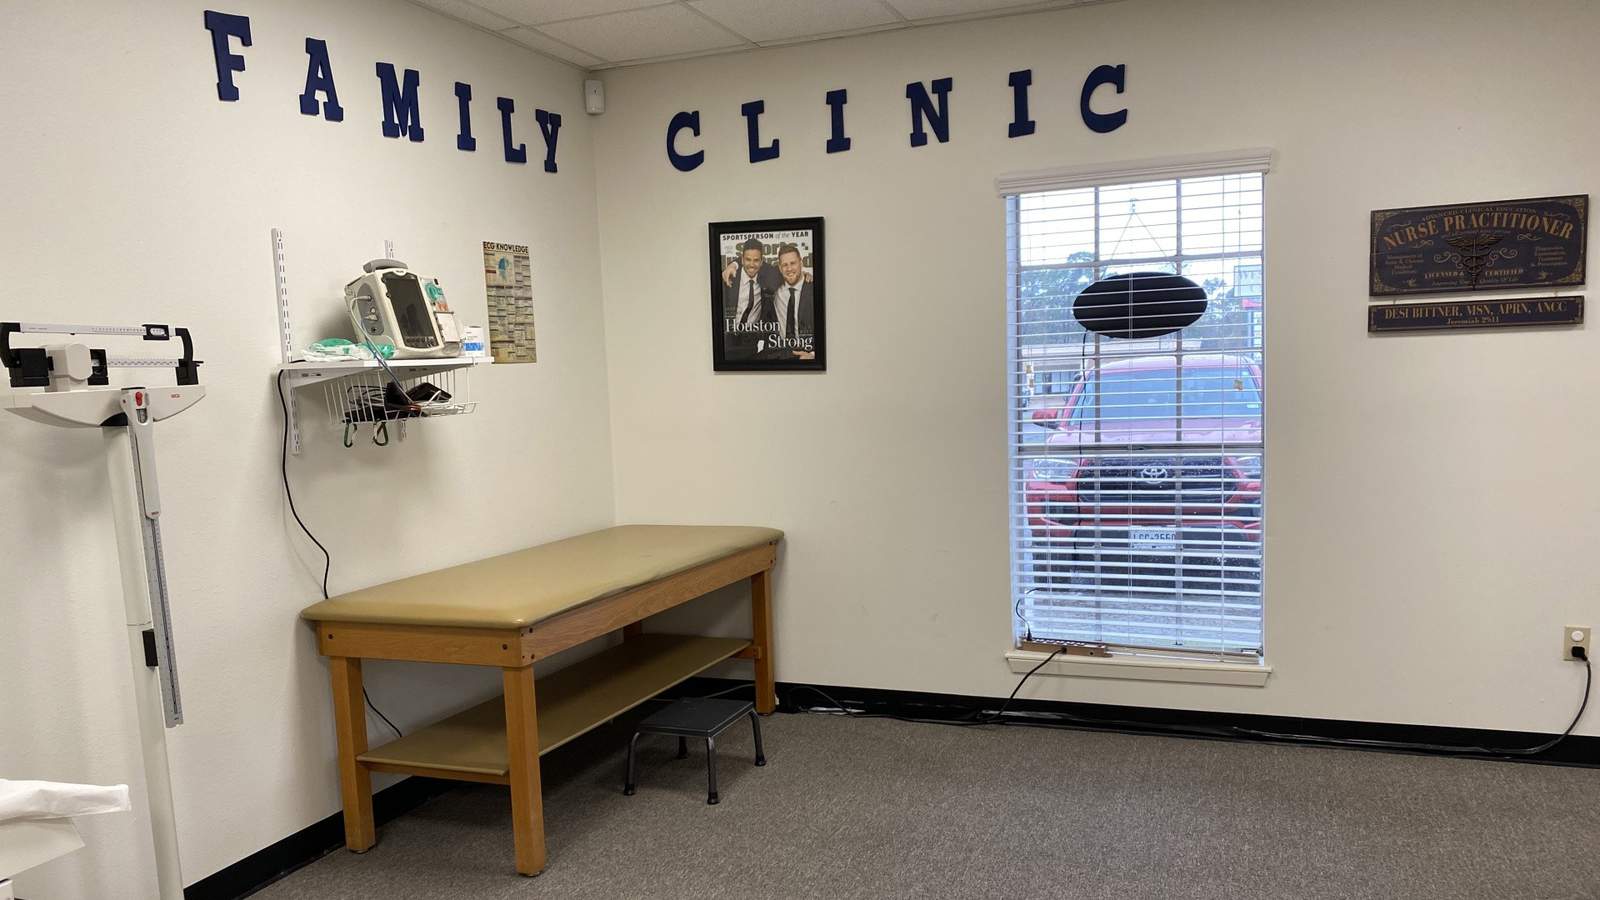 D Care Family Clinic : Nurse practitioner joins staff of First Care Clinic : The family care health centers pharmacy is also changing hours of operation: